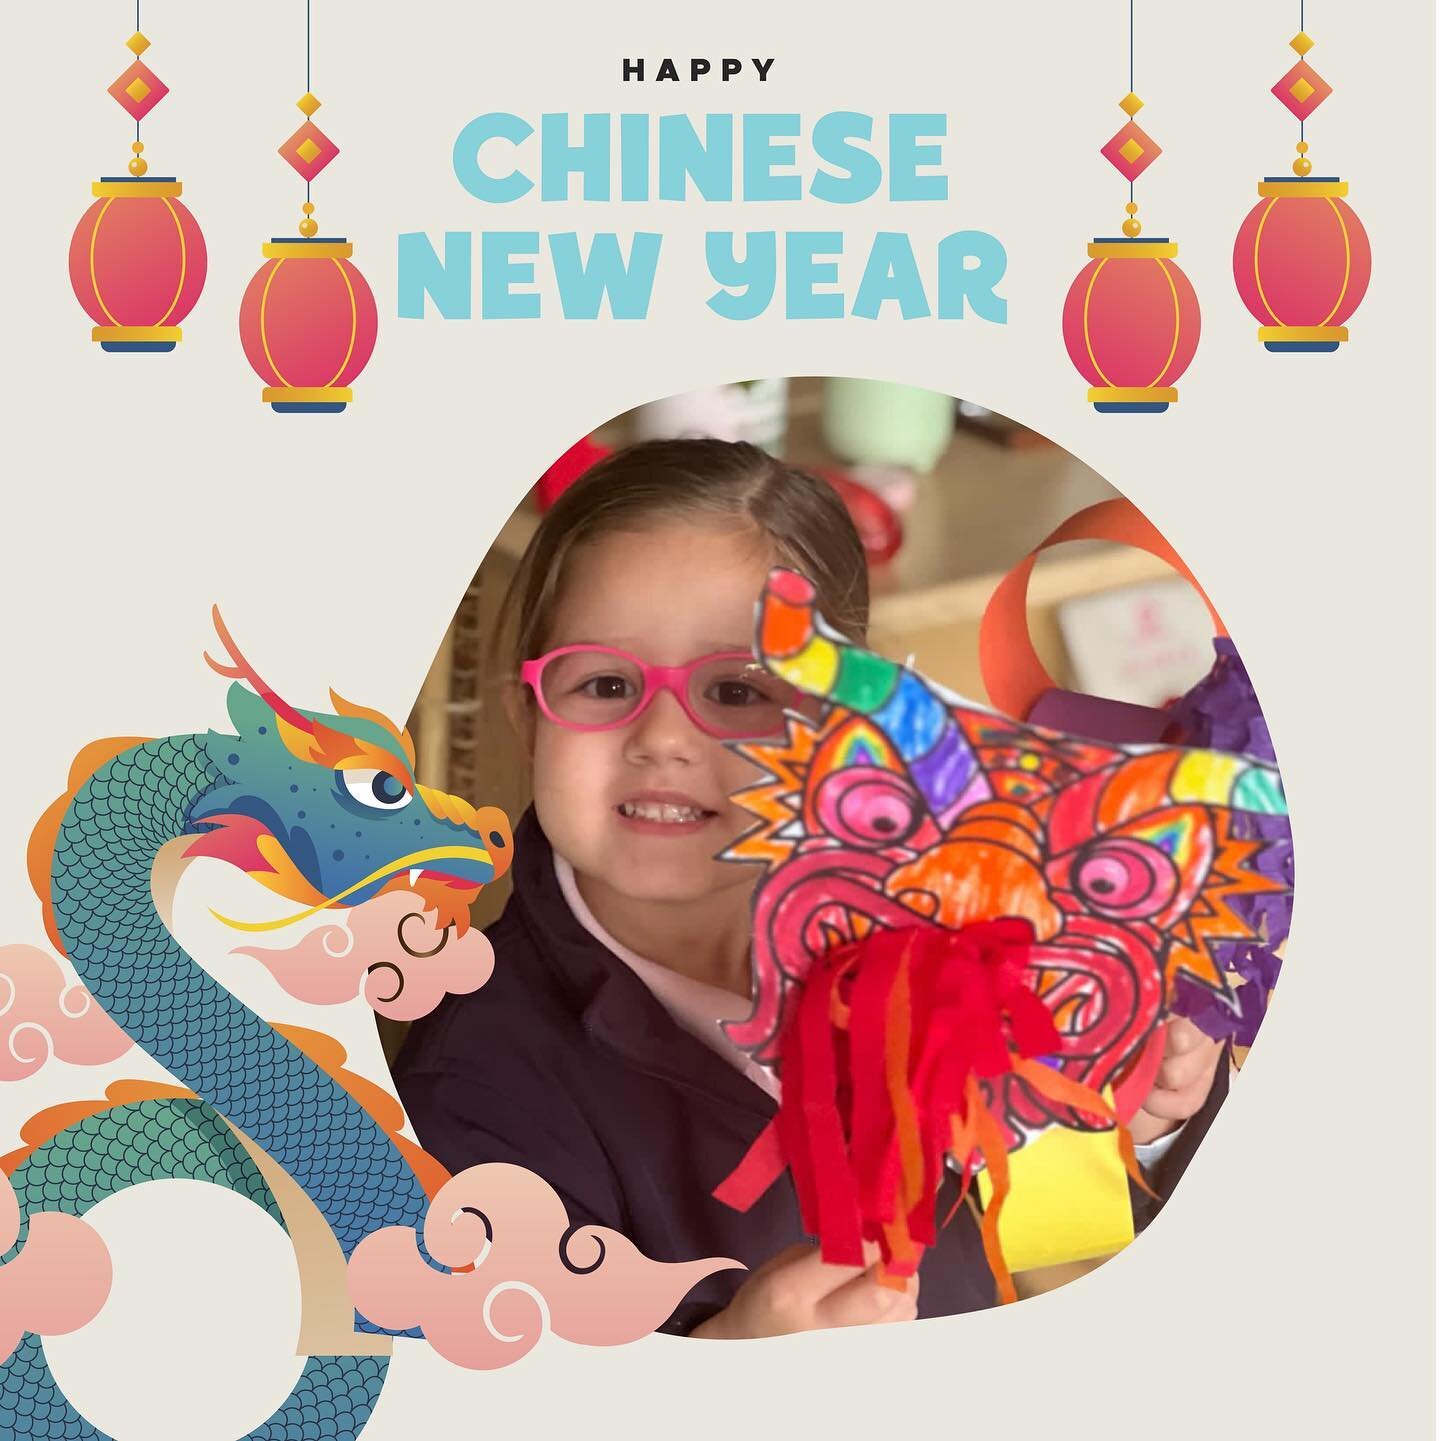 Happy Chinese New Year! Year of the Dragon 🐉